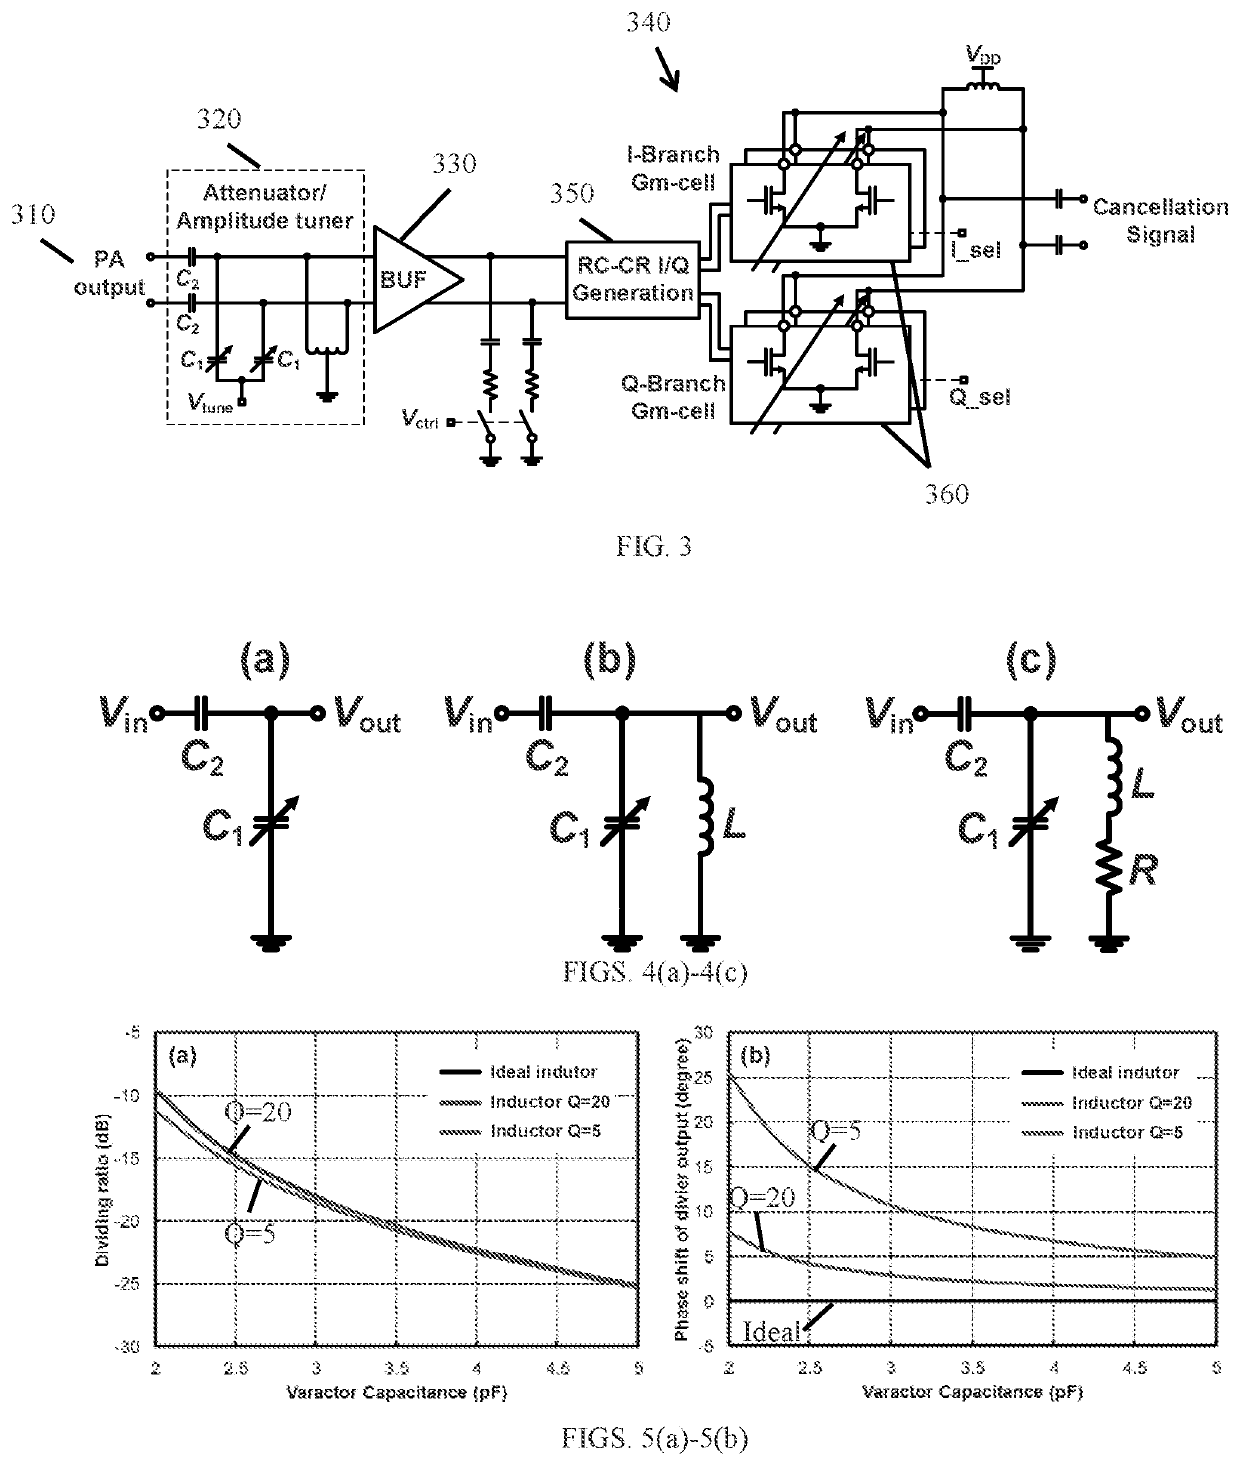 Electron paramagnetic resonance (EPR) systems with active cancellation